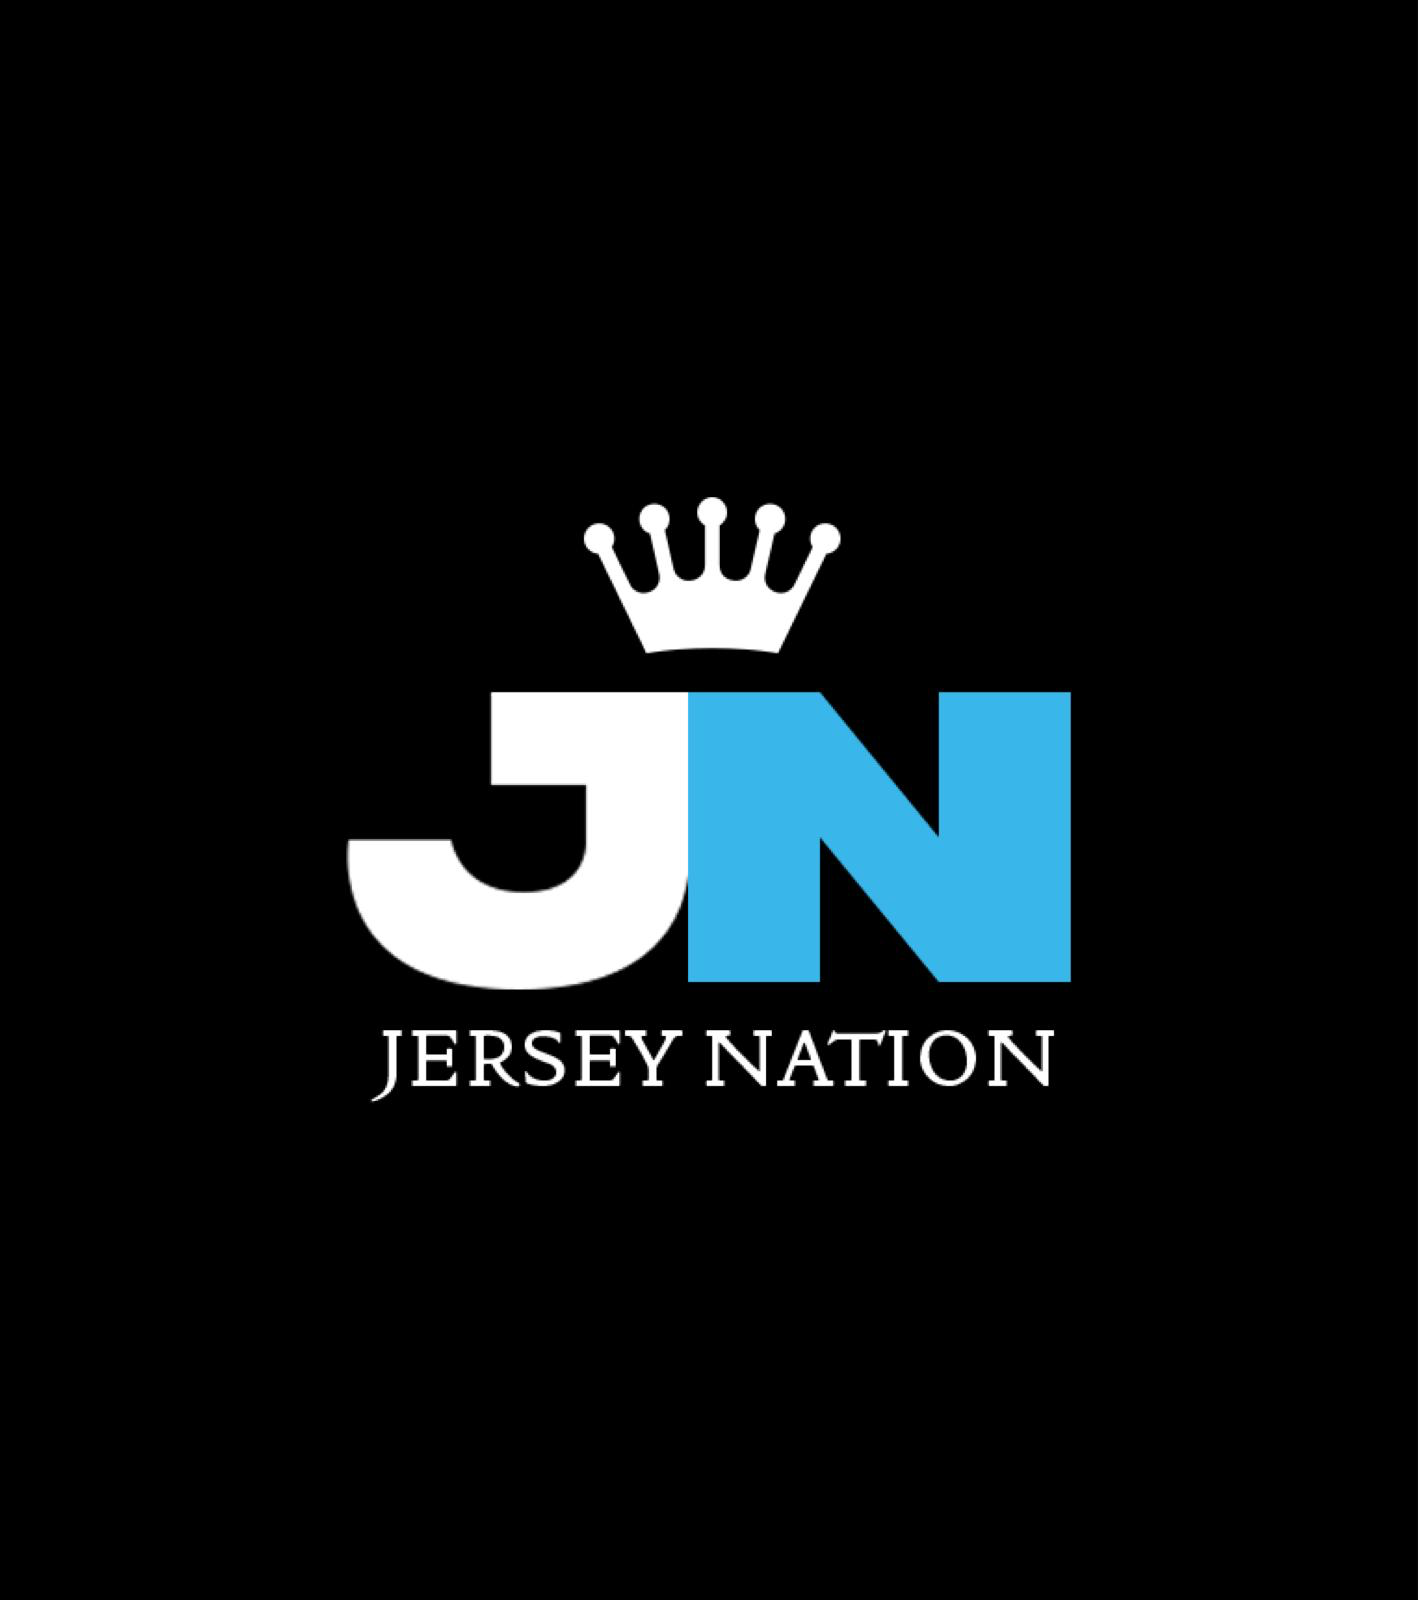 The Jersey Nation